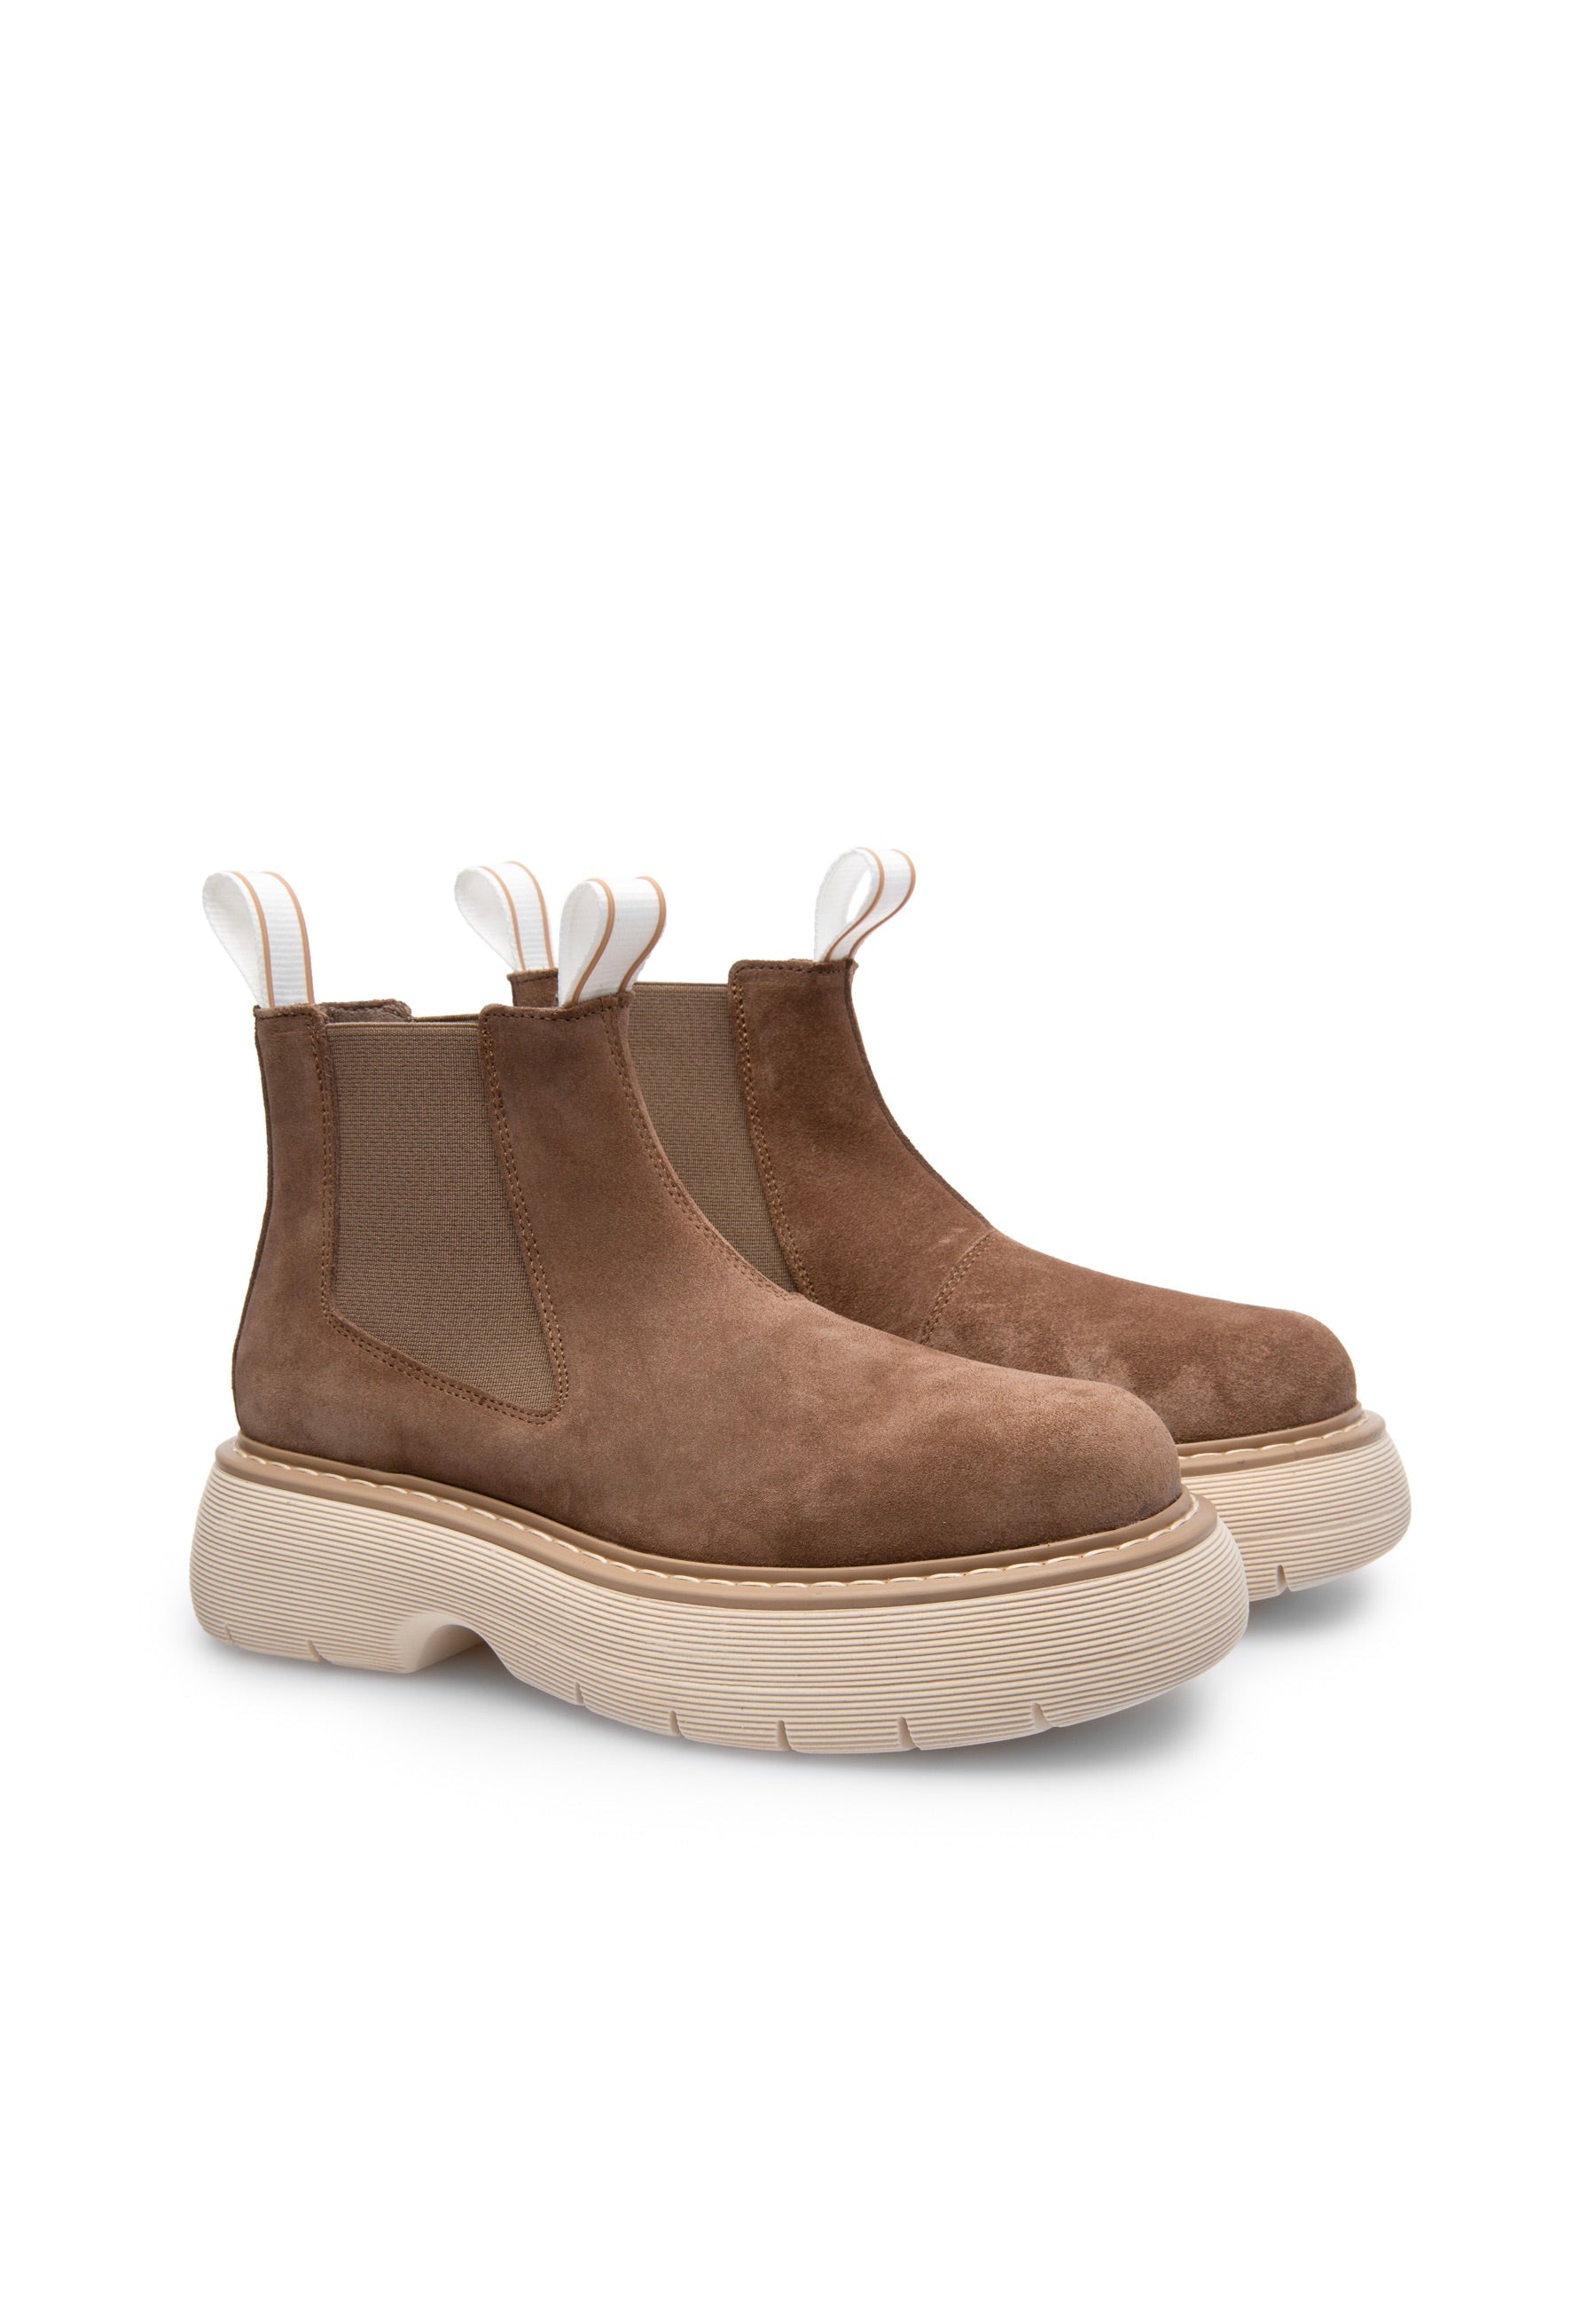 Ella Taupe Suede Leather Chelsea Boots LAST1527 - 3